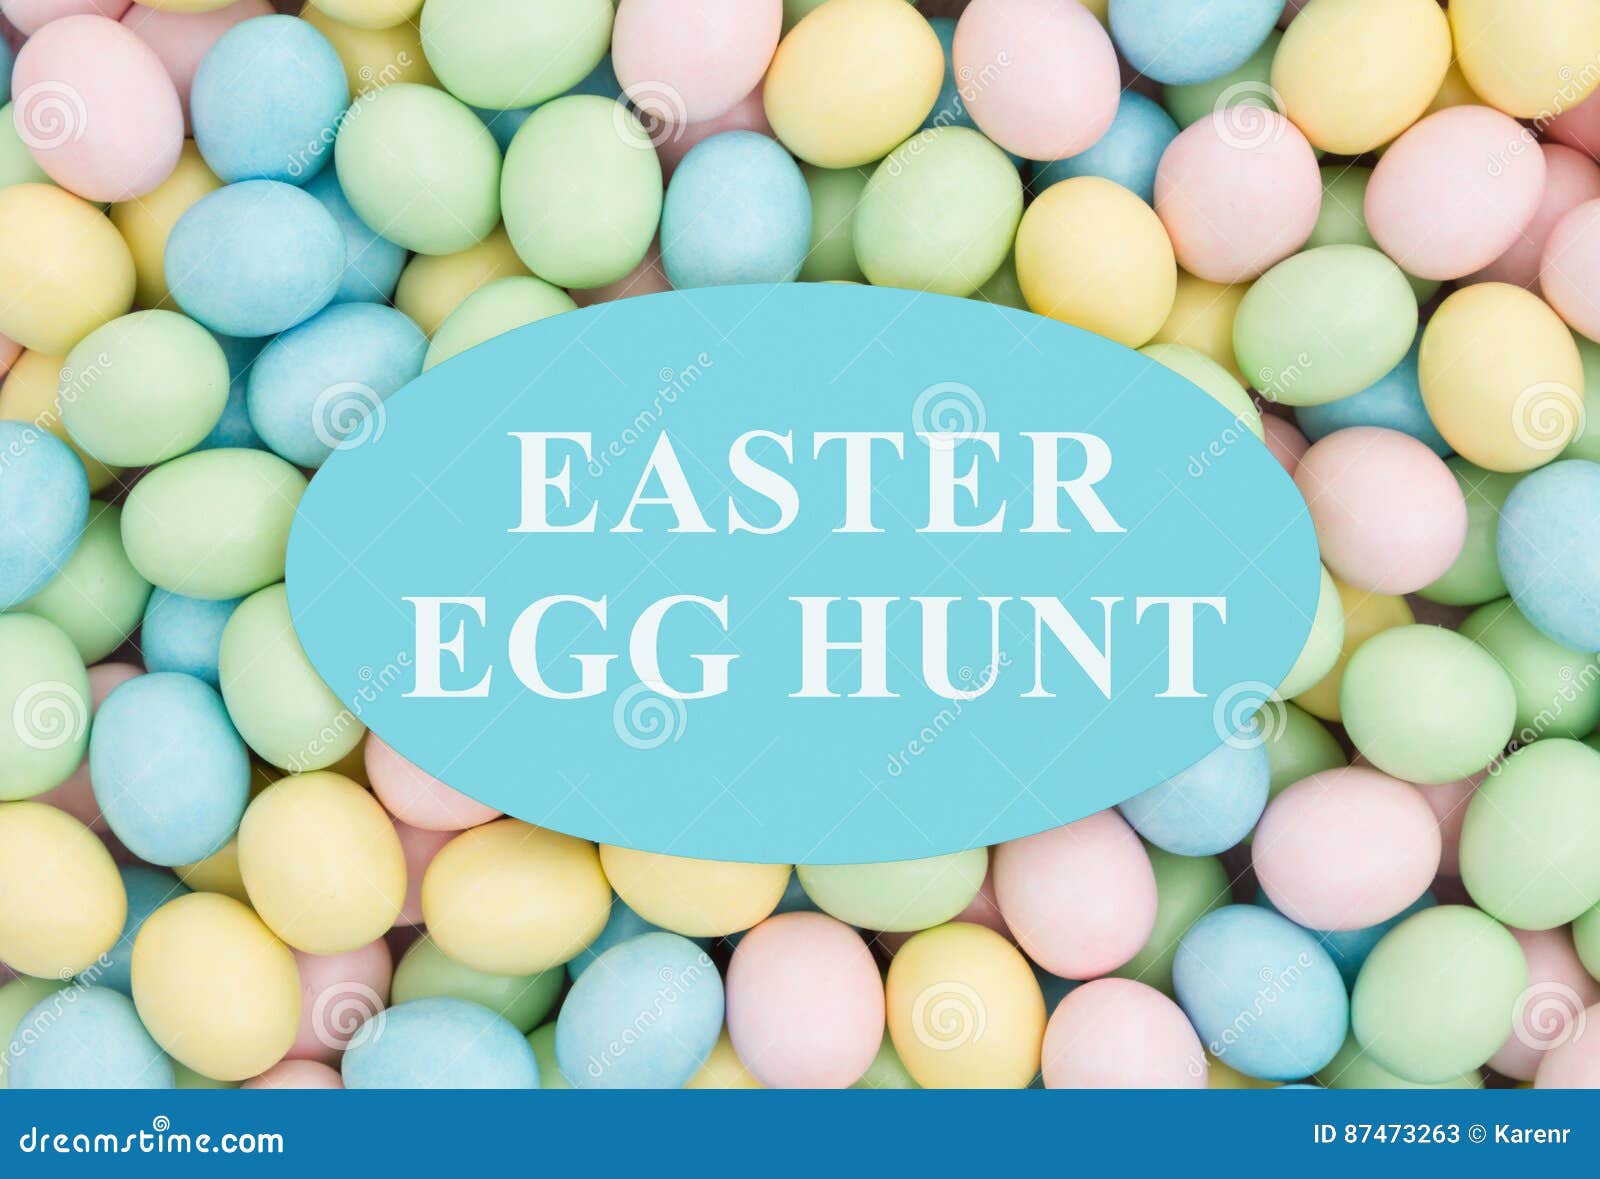 invitation to an easter egg hunt